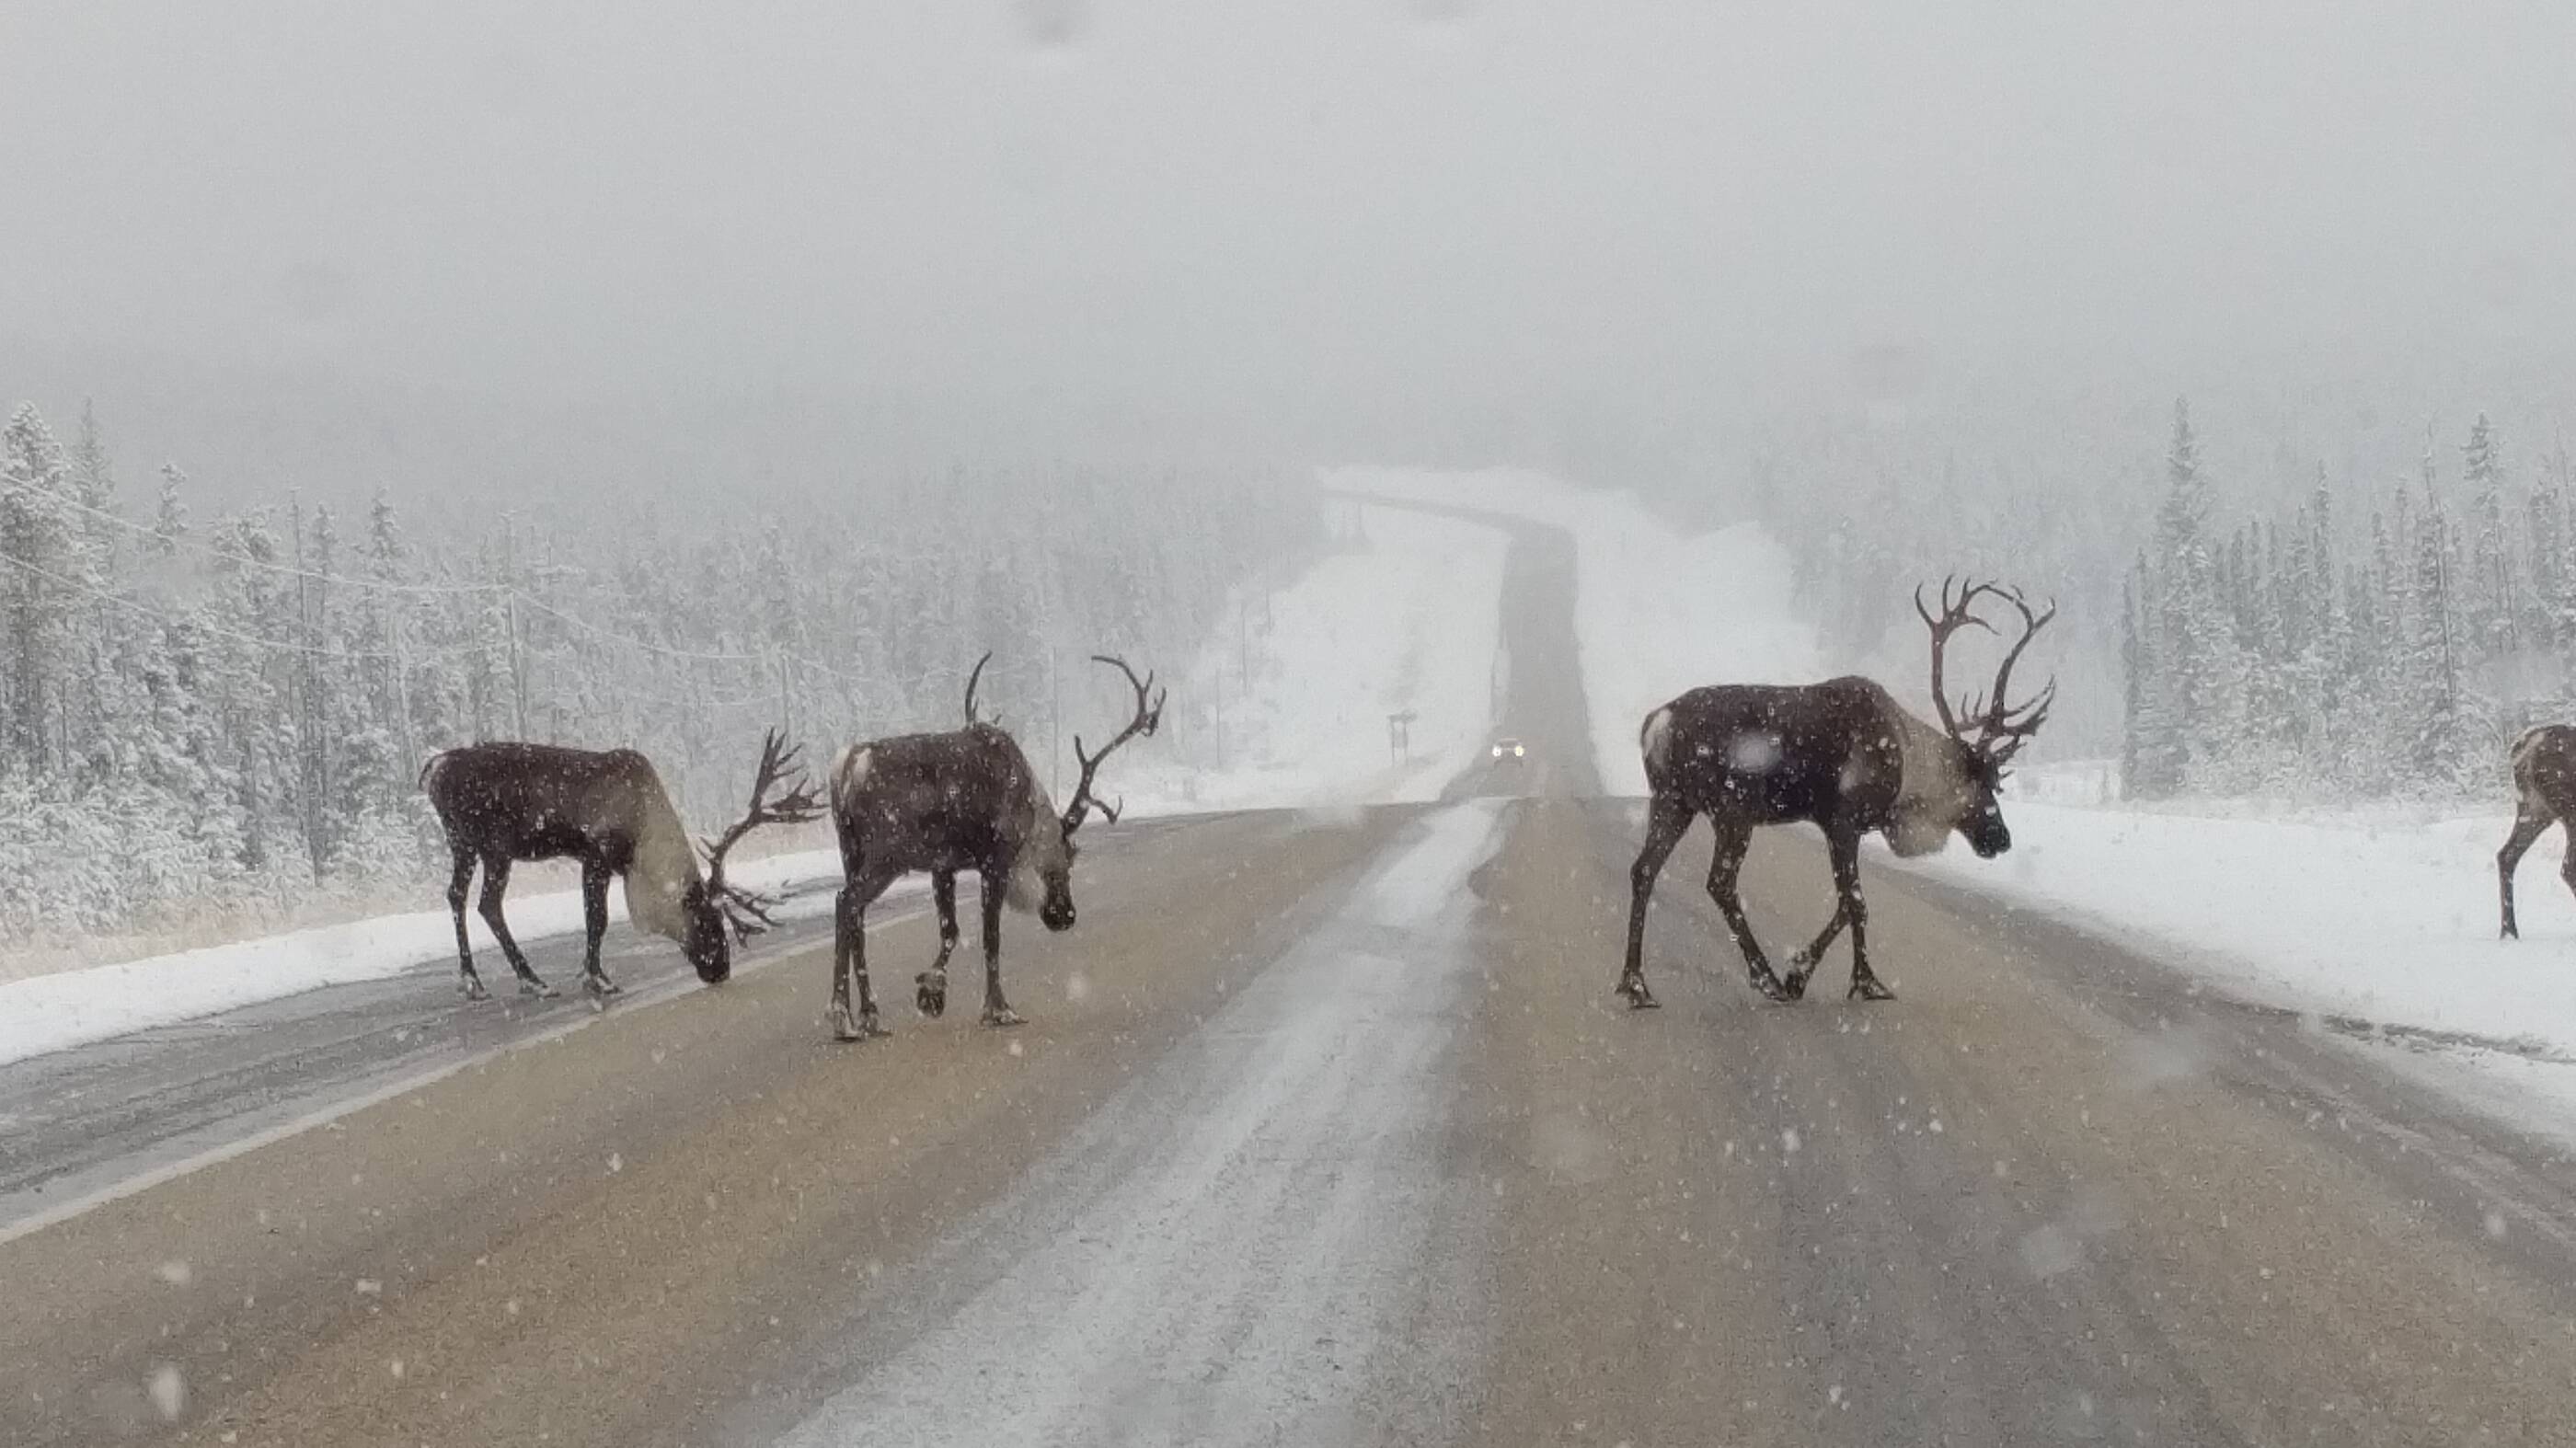 Protecting Canada's caribou  one kilometre at a time